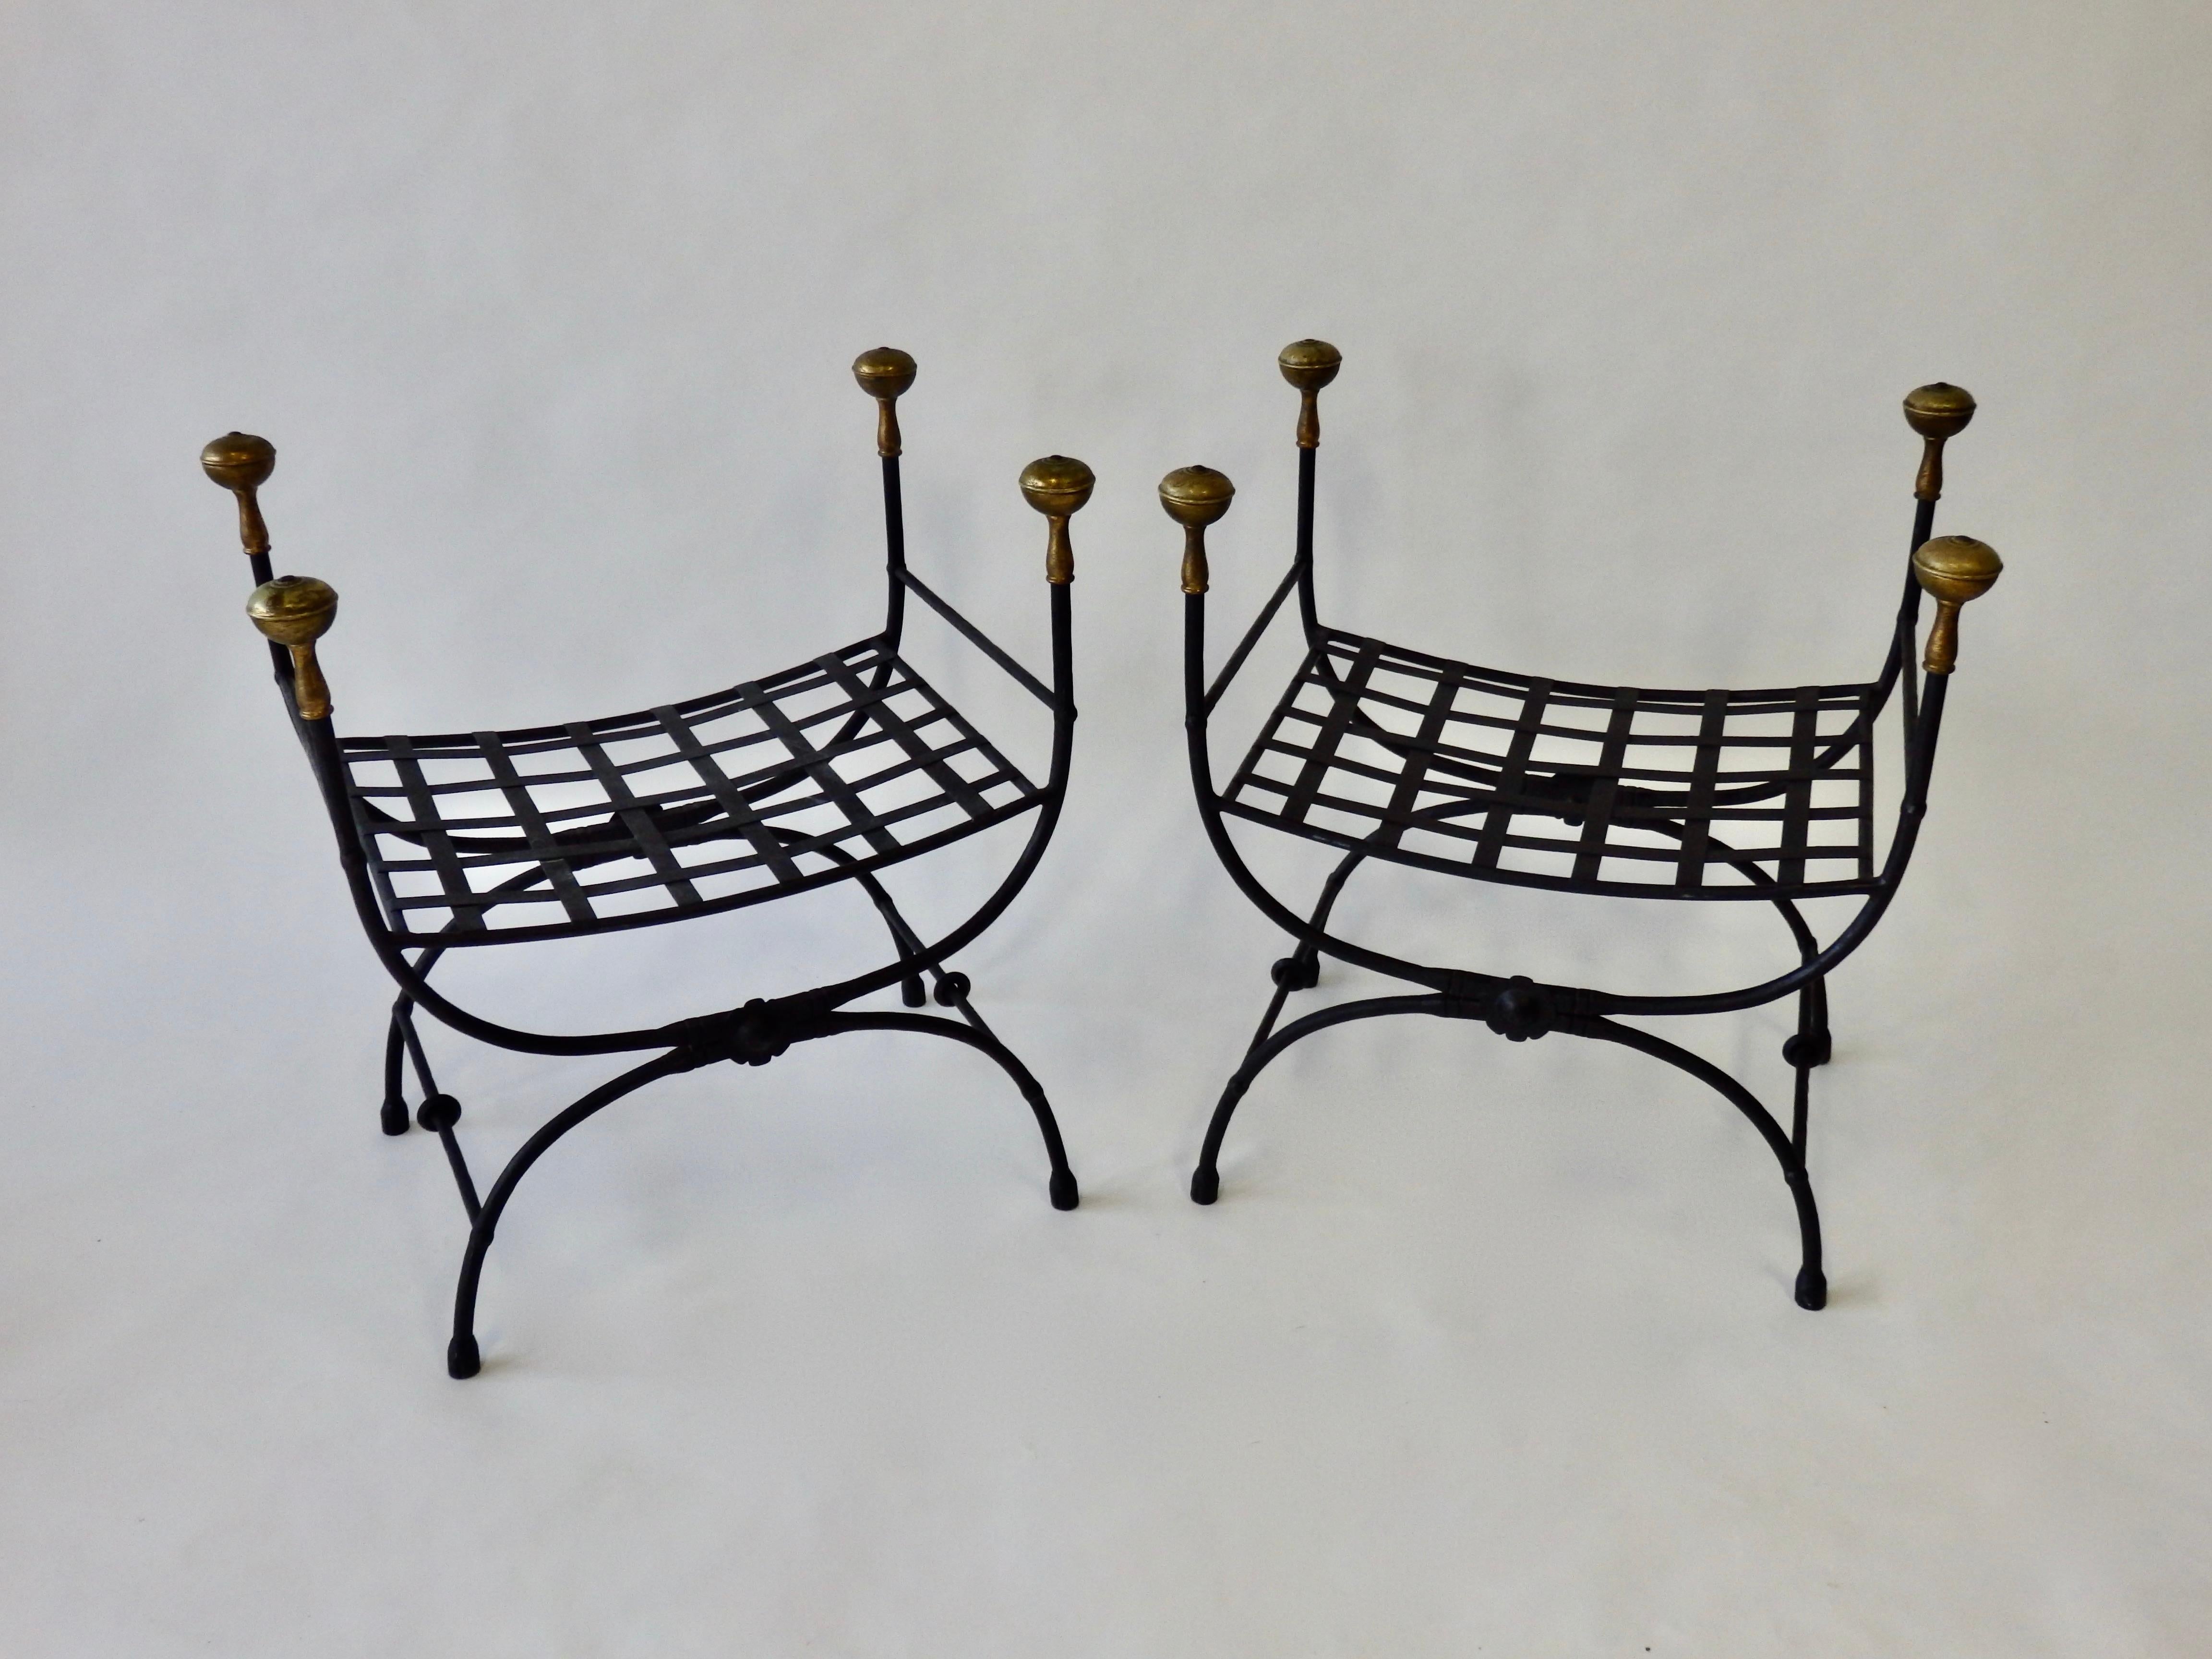 Pair of wrought iron benches with brass finial. Nicely detailed.